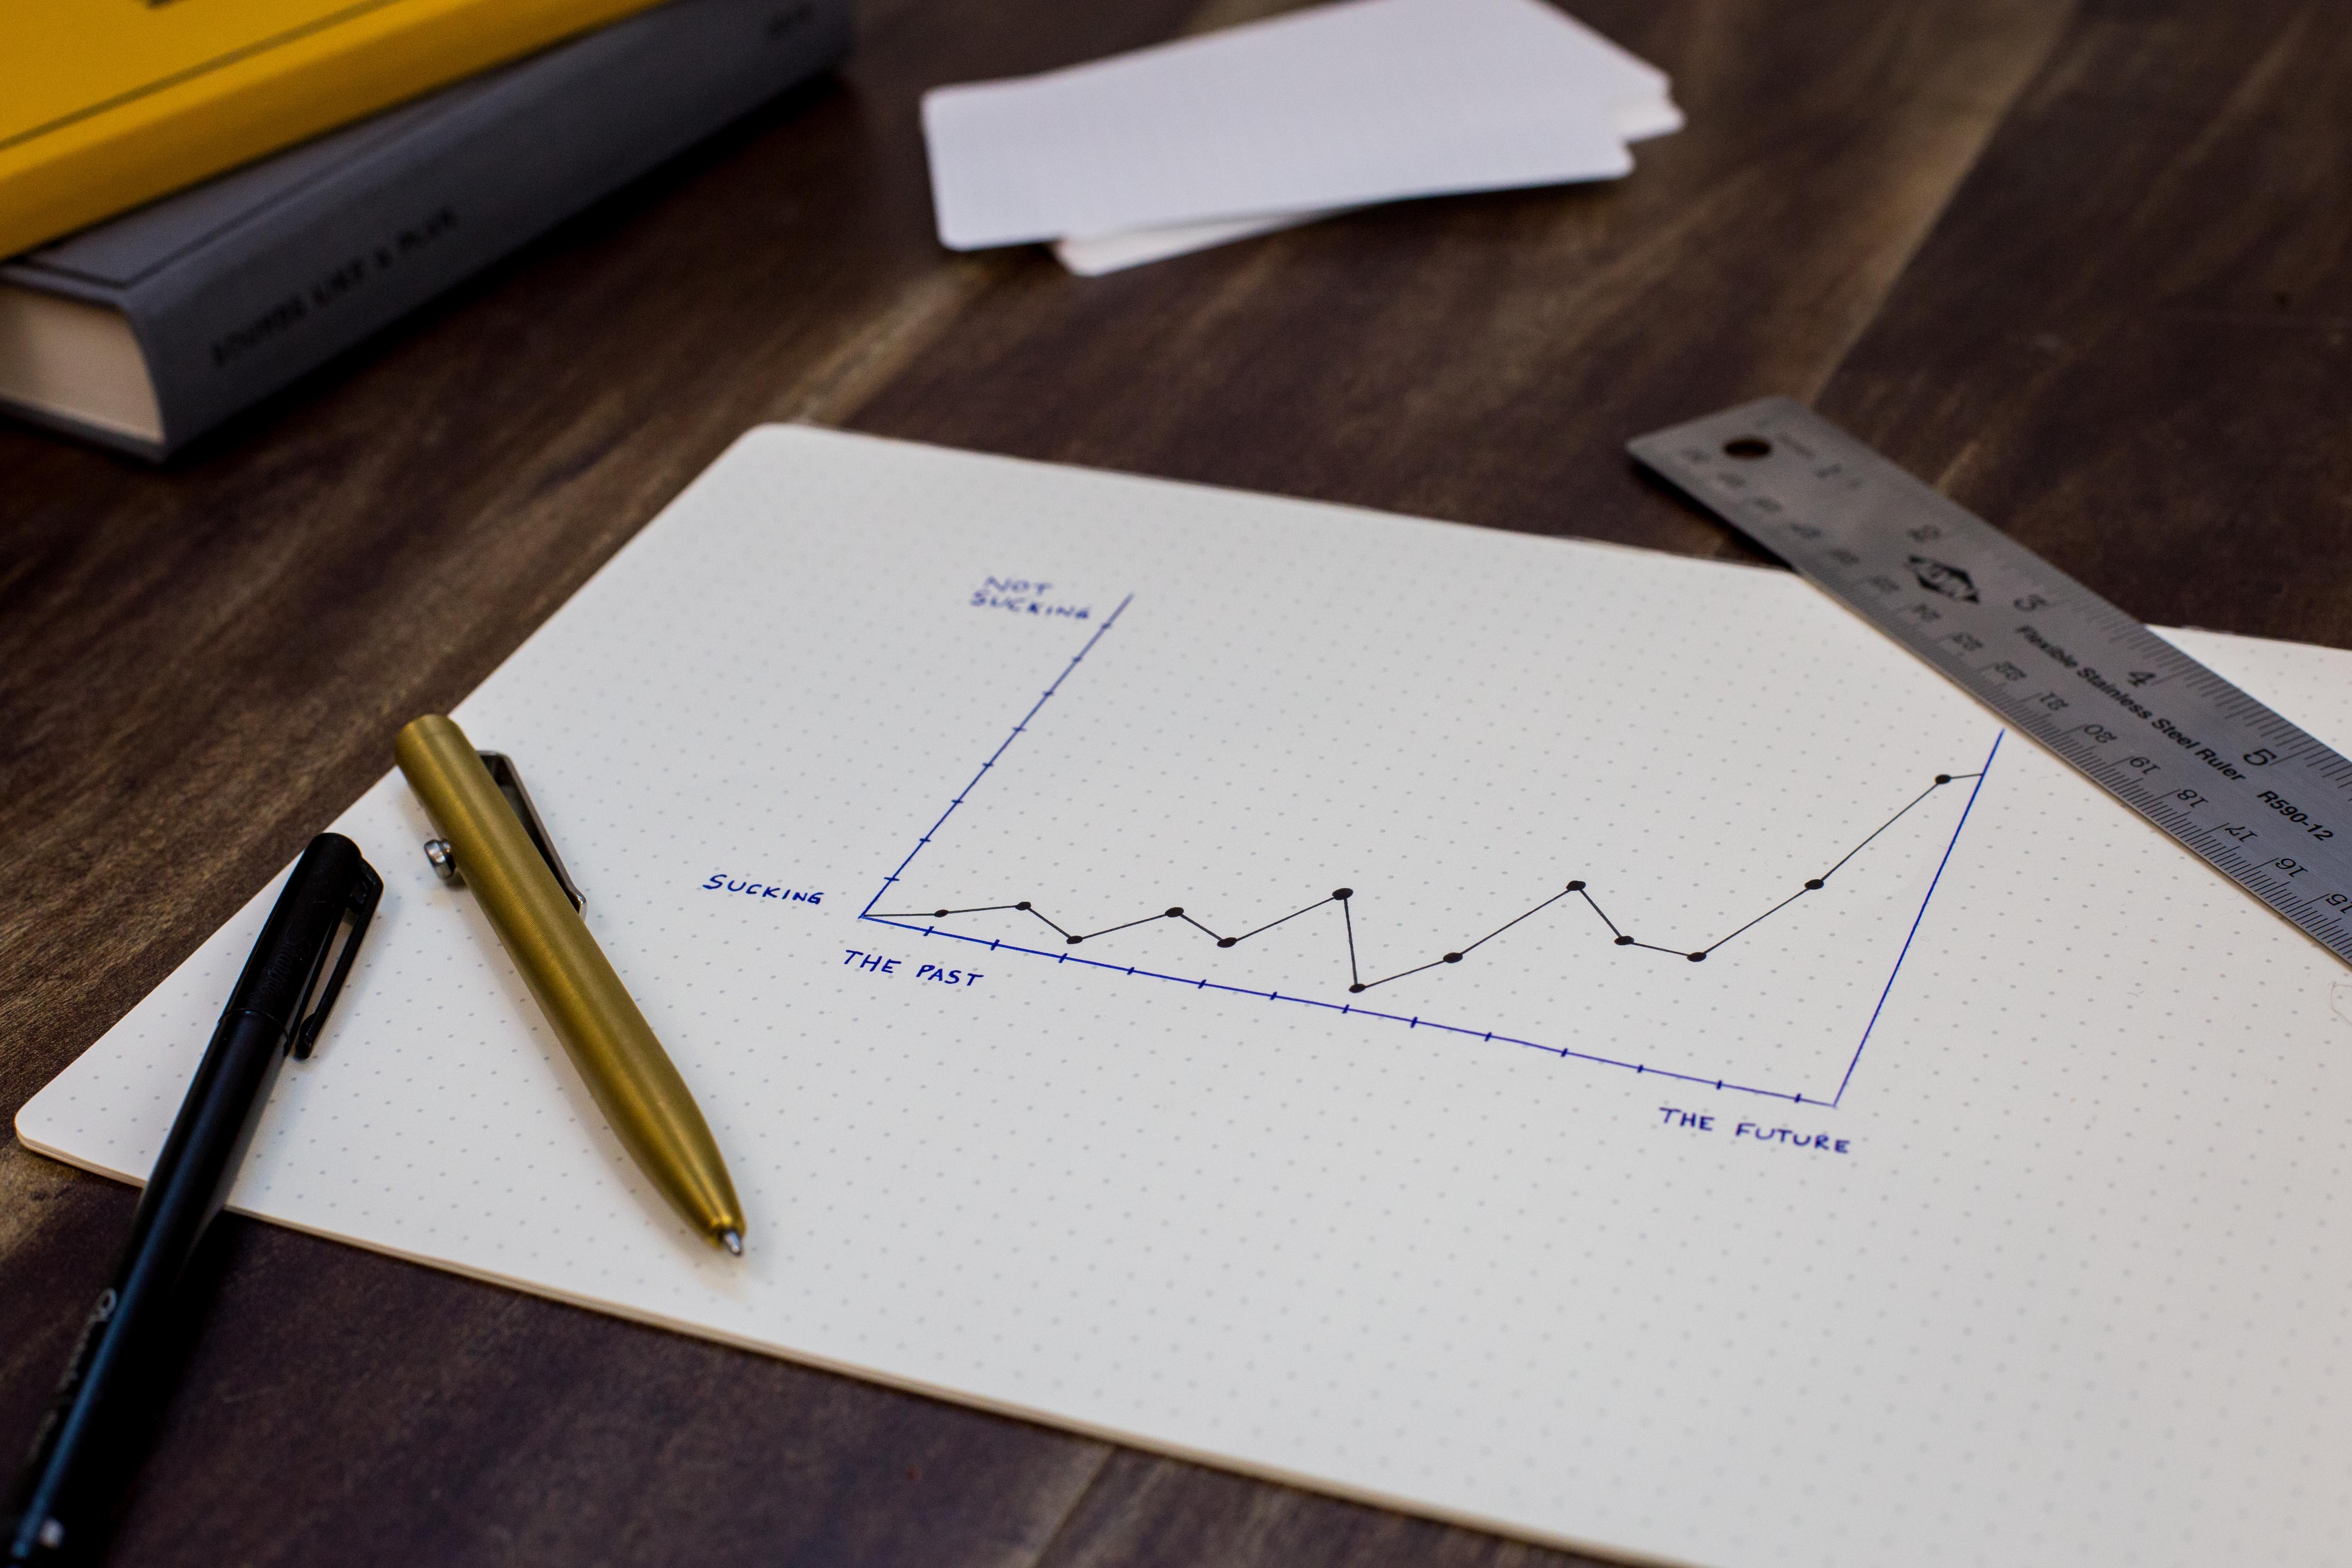 A line graph on a piece of paper with a pen and ruler next to it.